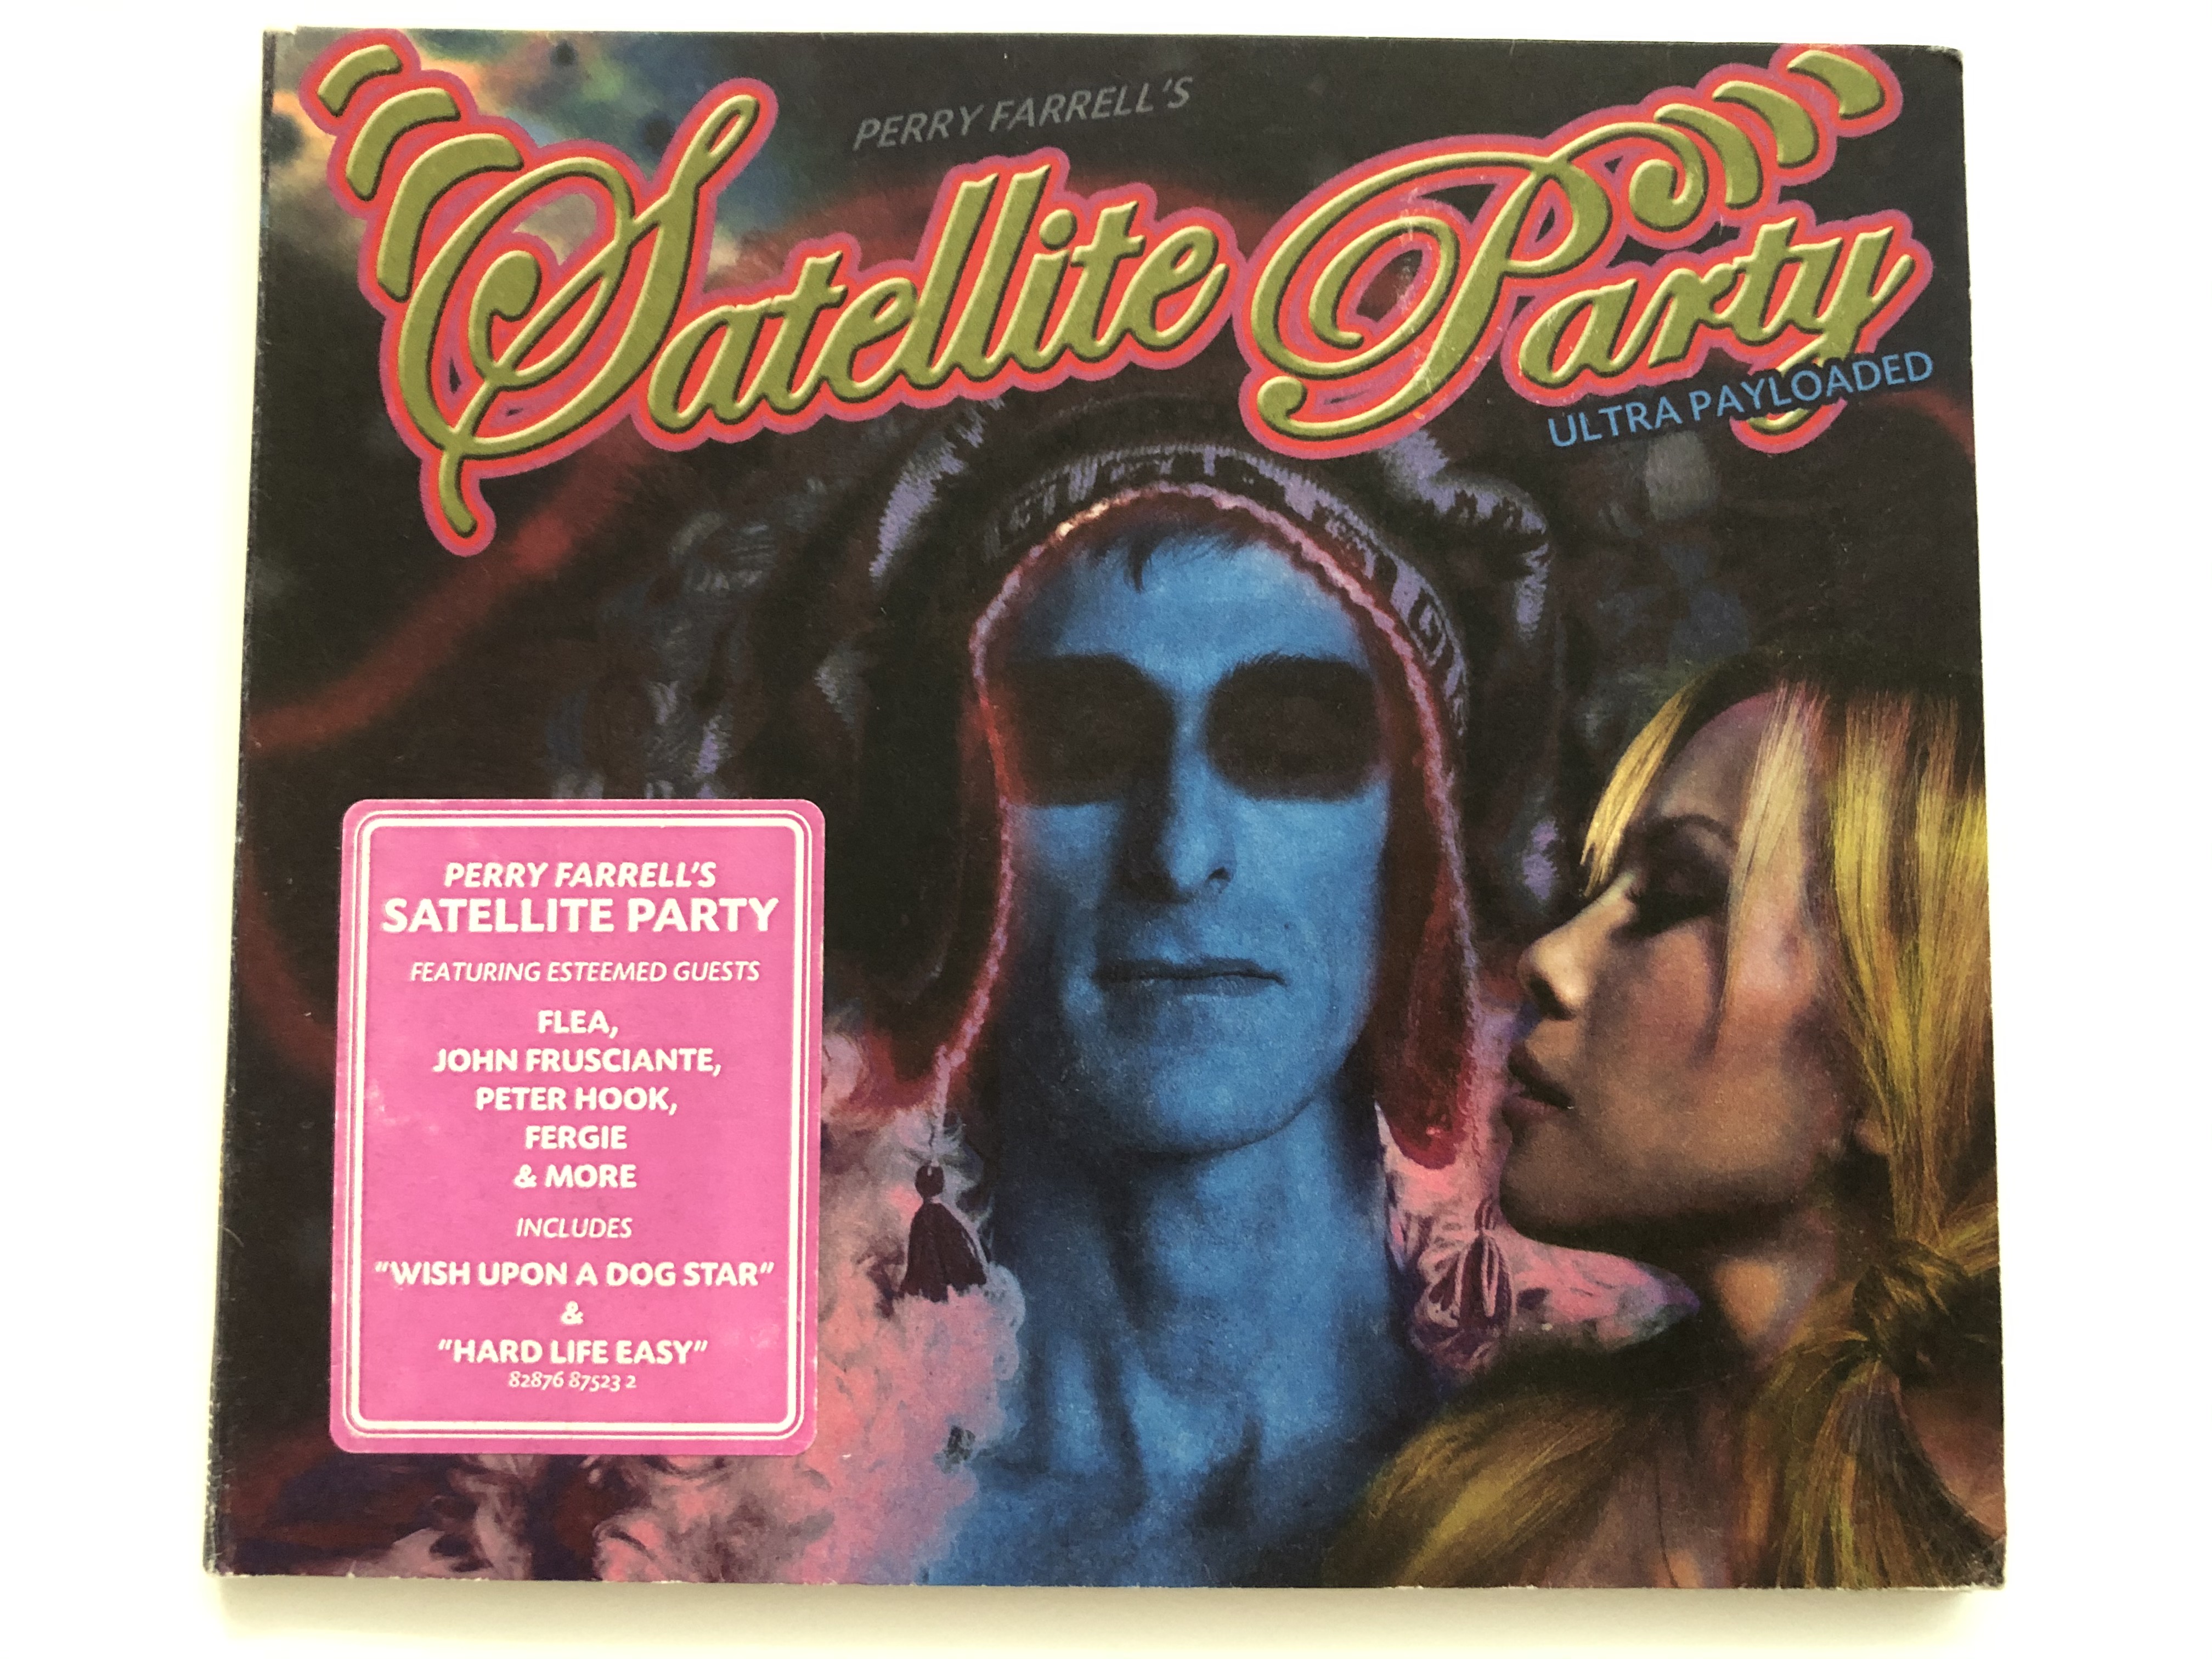 perry-farrell-s-satellite-party-ultra-payloaded-featuring-esteemed-guests-flea-john-frusciante-peter-hook-fergie-more-includes-wish-upon-a-dog-star-hard-life-easy-columbia-1-.jpg